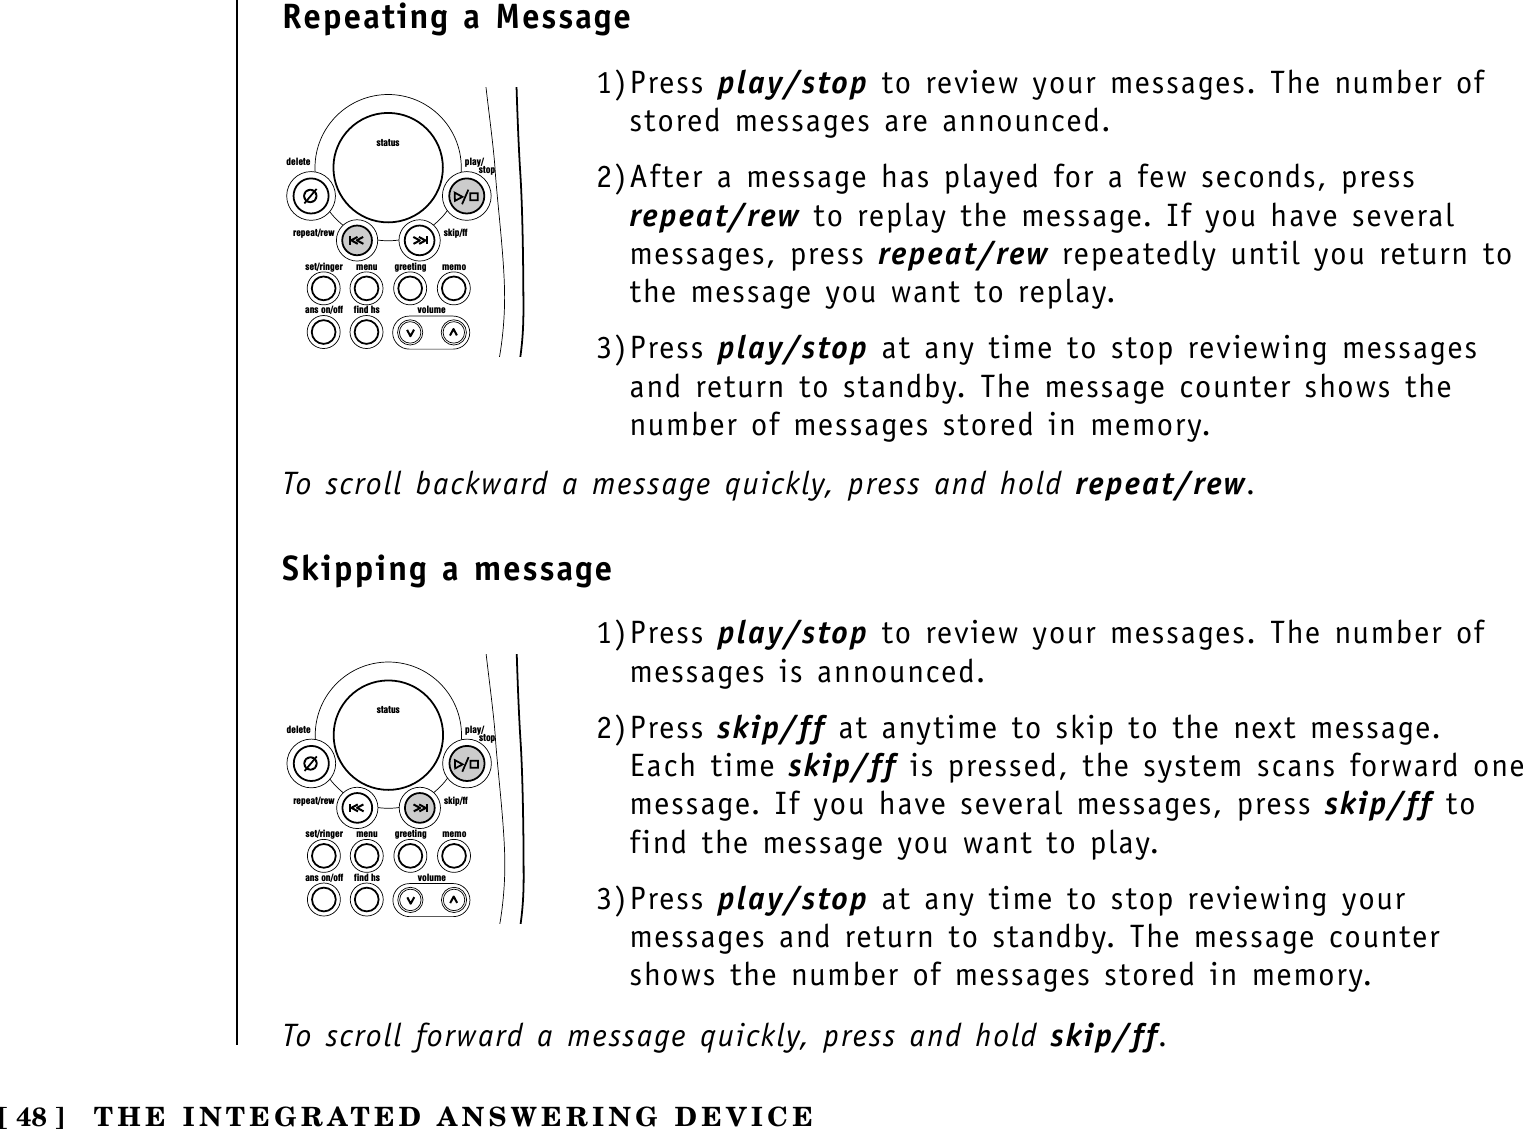 [ 48 ] THE INTEGRATED ANSWERING DEVICE1)Press play/stop to review your messages. The number ofstored messages are announced.2)After a message has played for a few seconds, pressrepeat/rew to replay the message. If you have severalmessages, press repeat/rew repeatedly until you return tothe message you want to replay.3)Press play/stop at any time to stop reviewing messagesand return to standby. The message counter shows thenumber of messages stored in memory. set/ringer menuans on/off find hs volumegreeting memoskip/ffrepeat/rewdelete play/      stopstatusset/ringer menuans on/off find hs volumegreeting memoskip/ffrepeat/rewdelete play/      stopstatus1)Press play/stop to review your messages. The number ofmessages is announced.2)Press skip/ff at anytime to skip to the next message.Each time skip/ff is pressed, the system scans forward onemessage. If you have several messages, press skip/ff tofind the message you want to play.3)Press play/stop at any time to stop reviewing yourmessages and return to standby. The message countershows the number of messages stored in memory. Repeating a MessageSkipping a messageTo scroll backward a message quickly, press and hold repeat/rew.To scroll forward a message quickly, press and hold skip/ff.